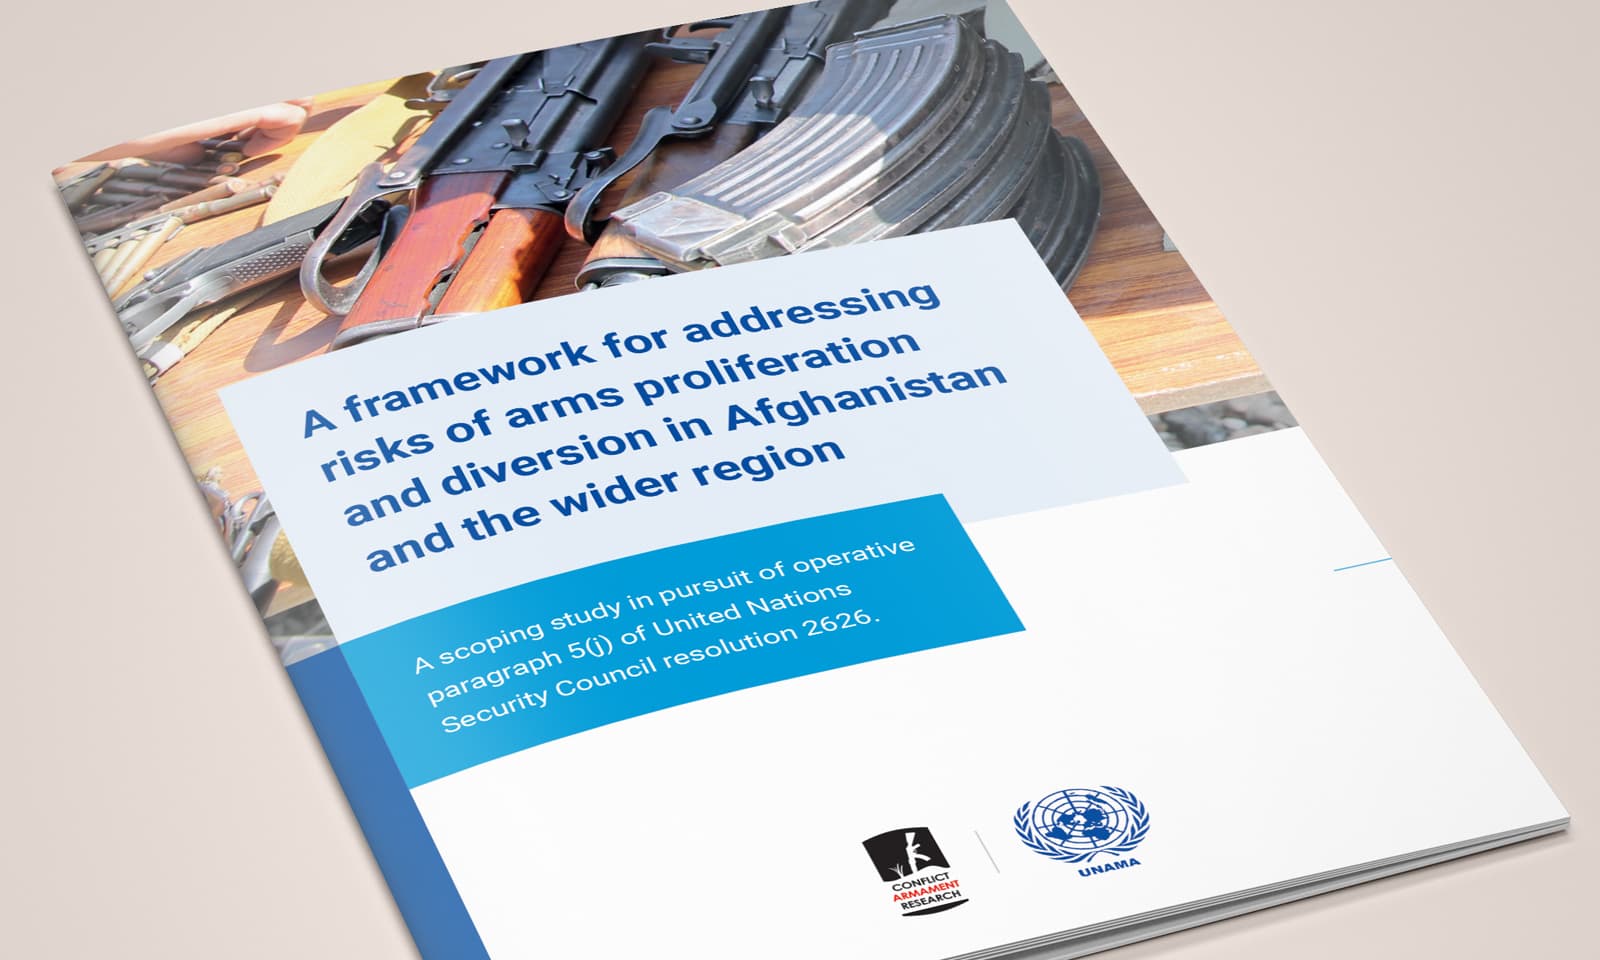 A framework for addressing risk of arms proliferation and diversion - cover